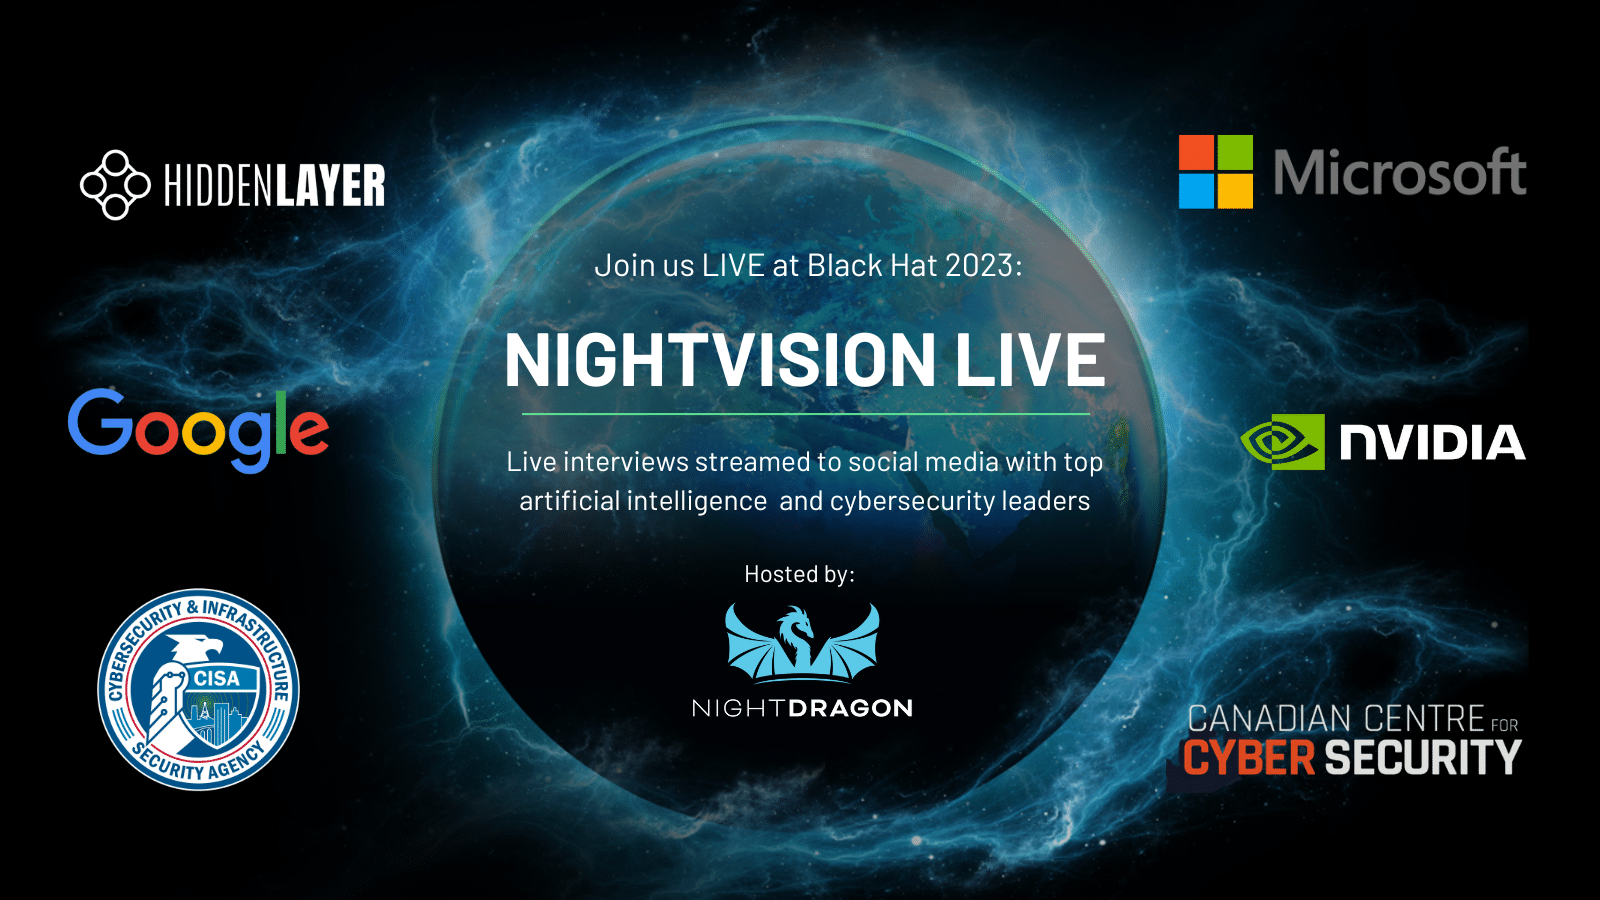 NightVision Live Black Hat 2023 Artificial Intelligence